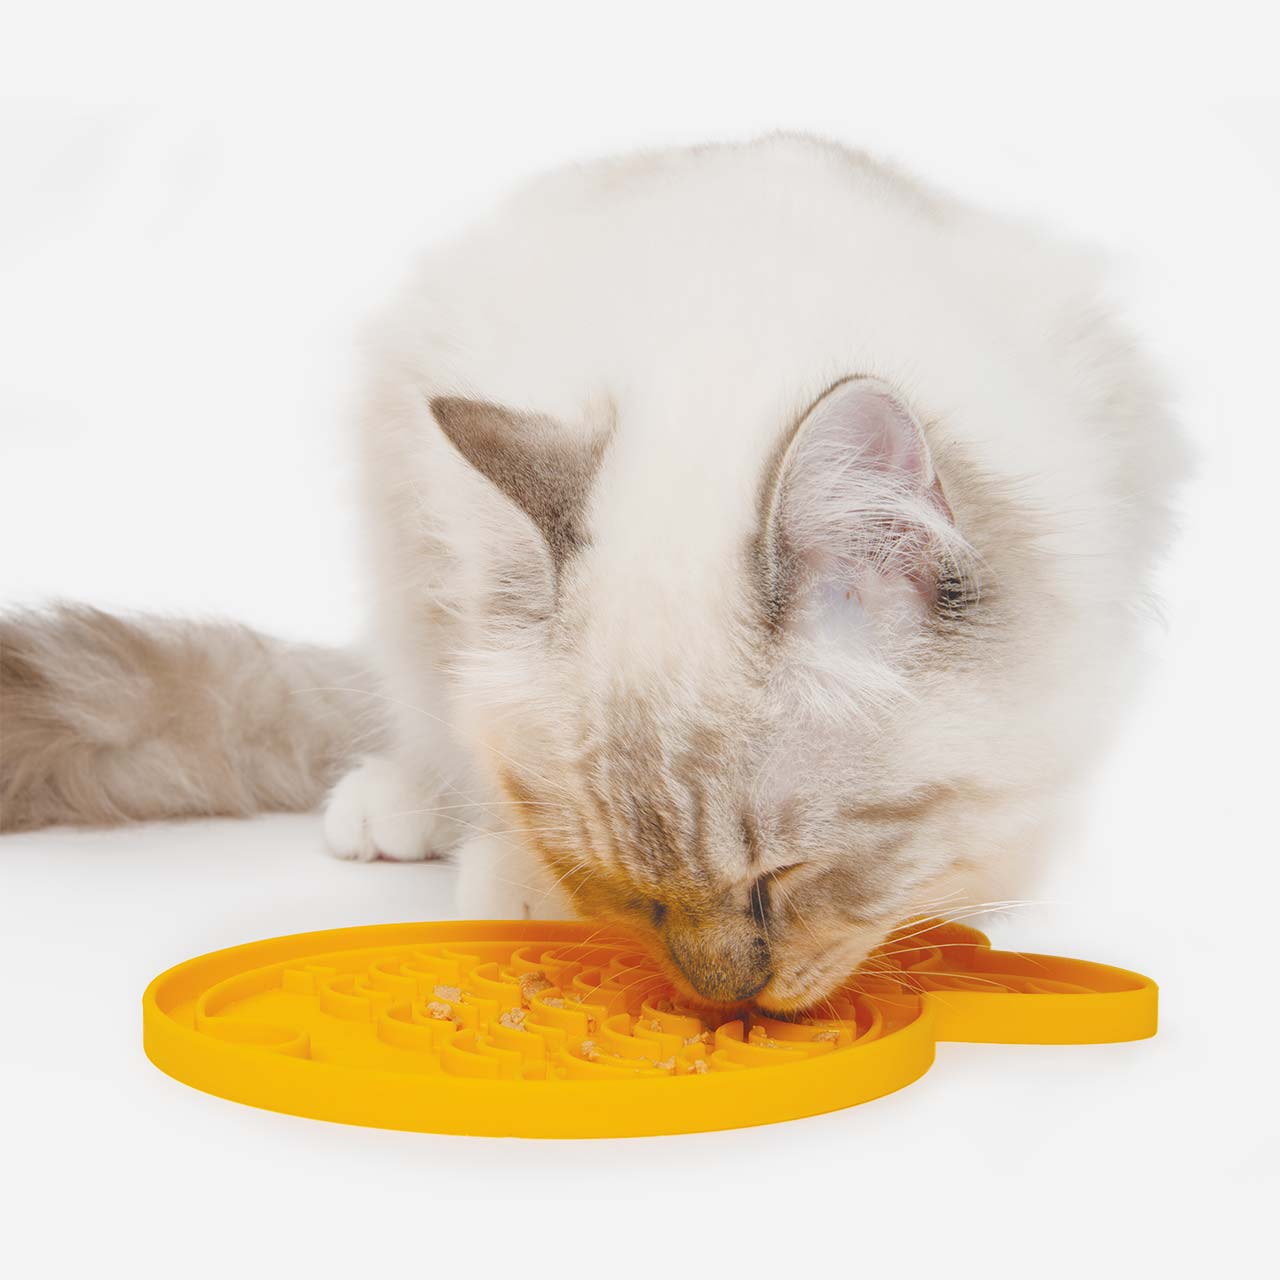 Cat licking from the creamy feeding mat